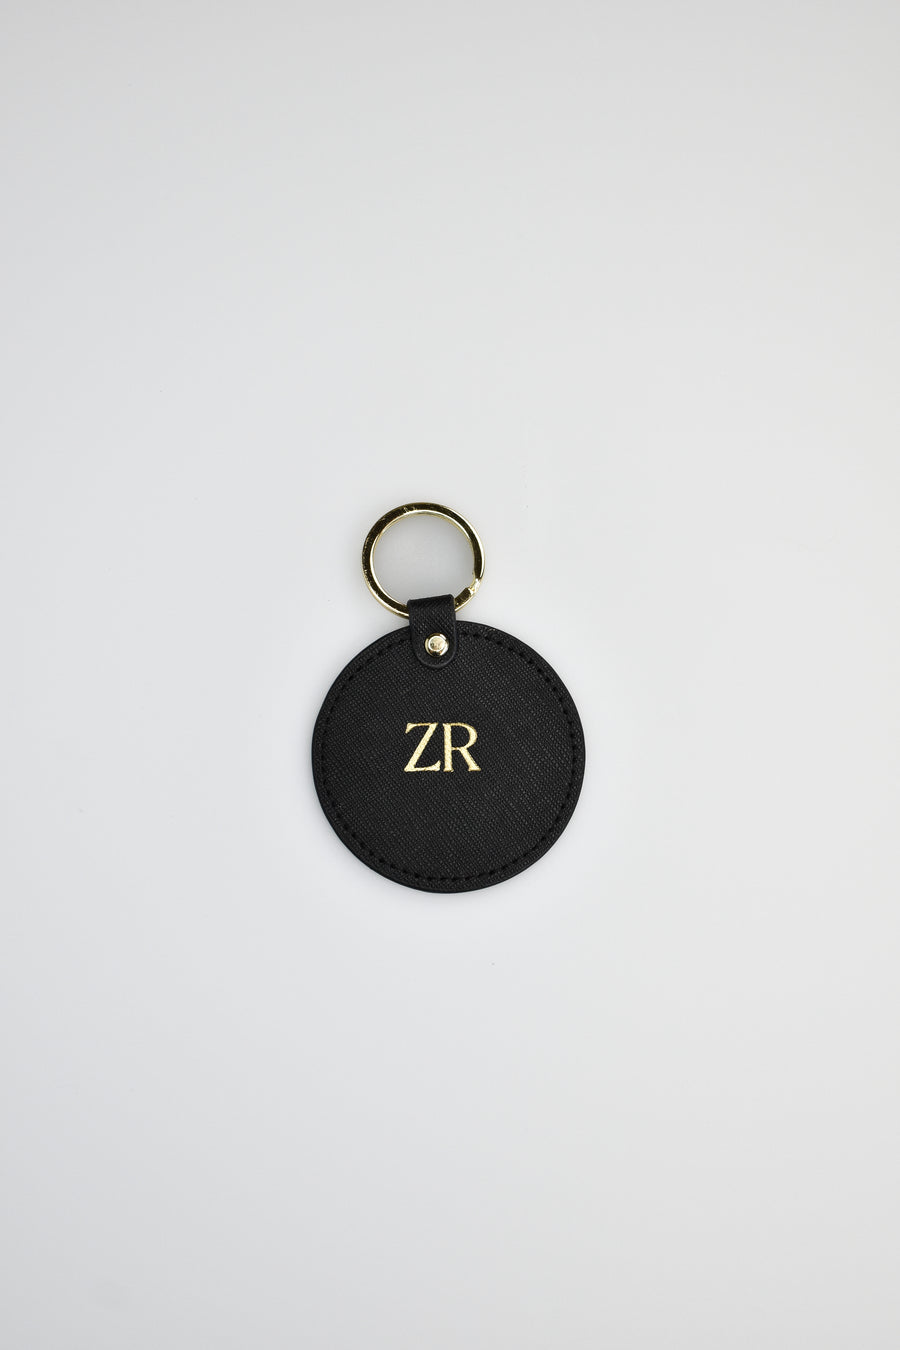 Saffiano Leather Round Keyring - Black & Gold - The Best Kind